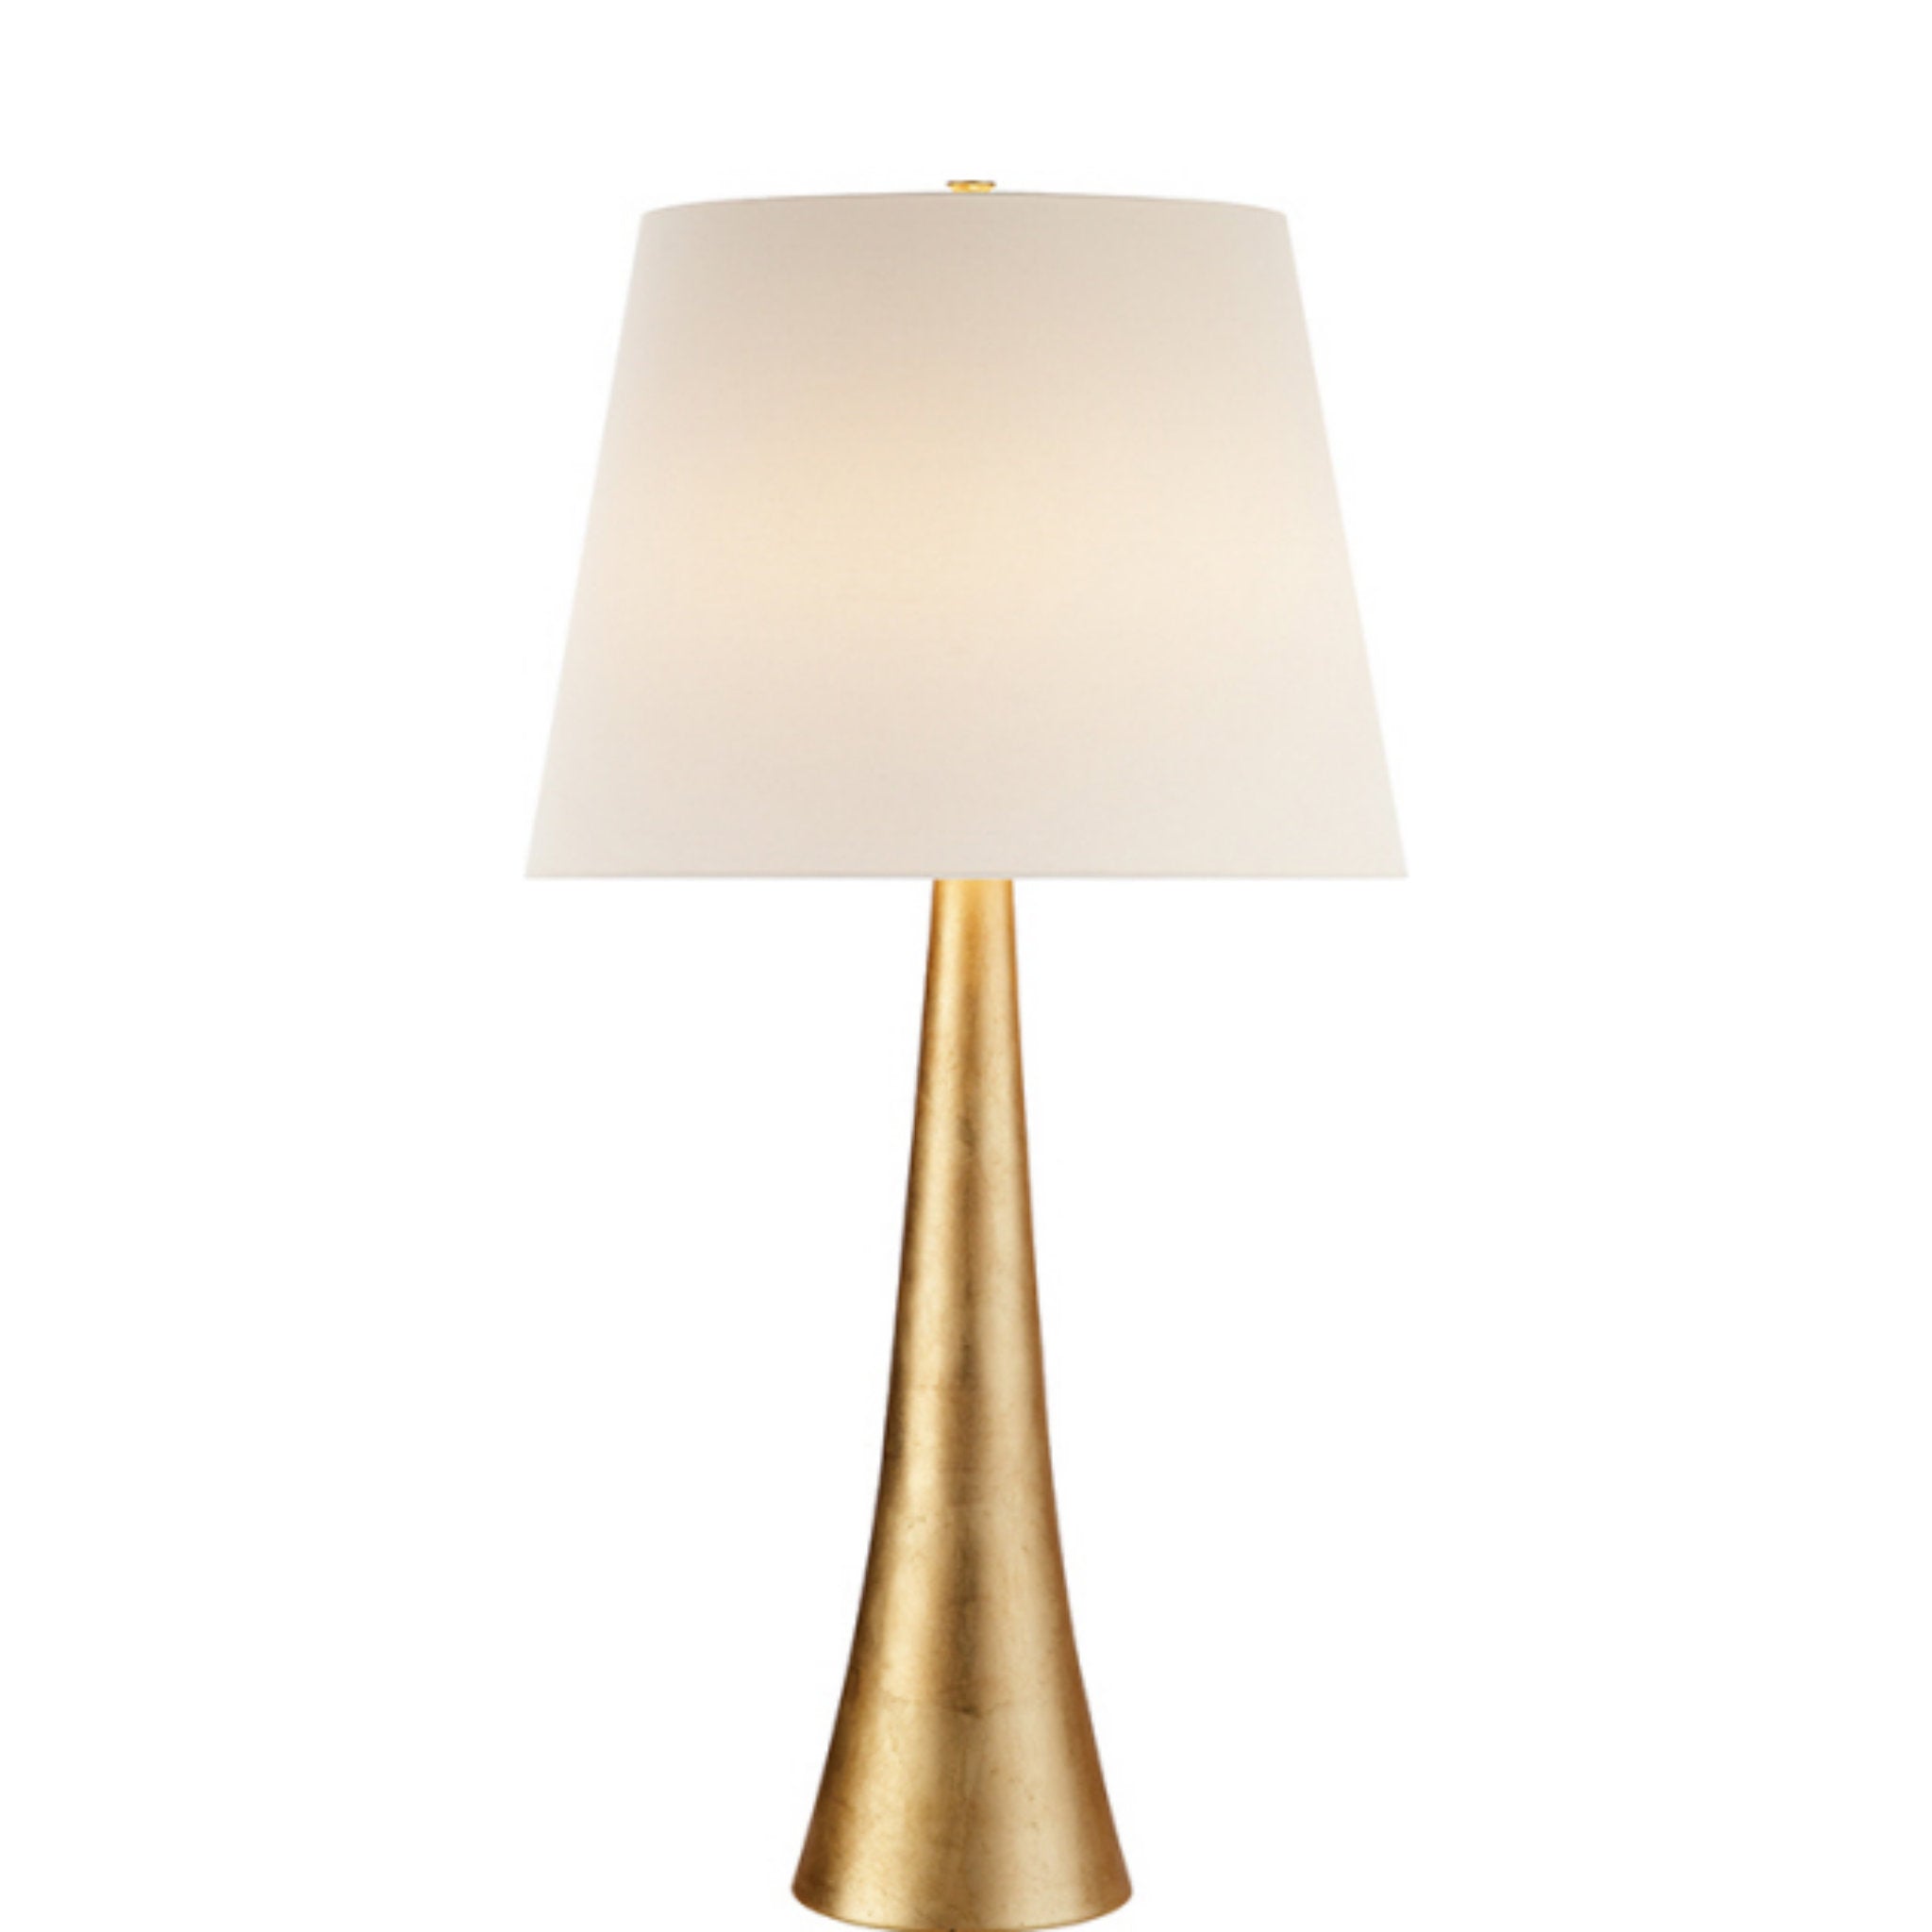 AERIN Dover Table Lamp in Gild with Linen Shade